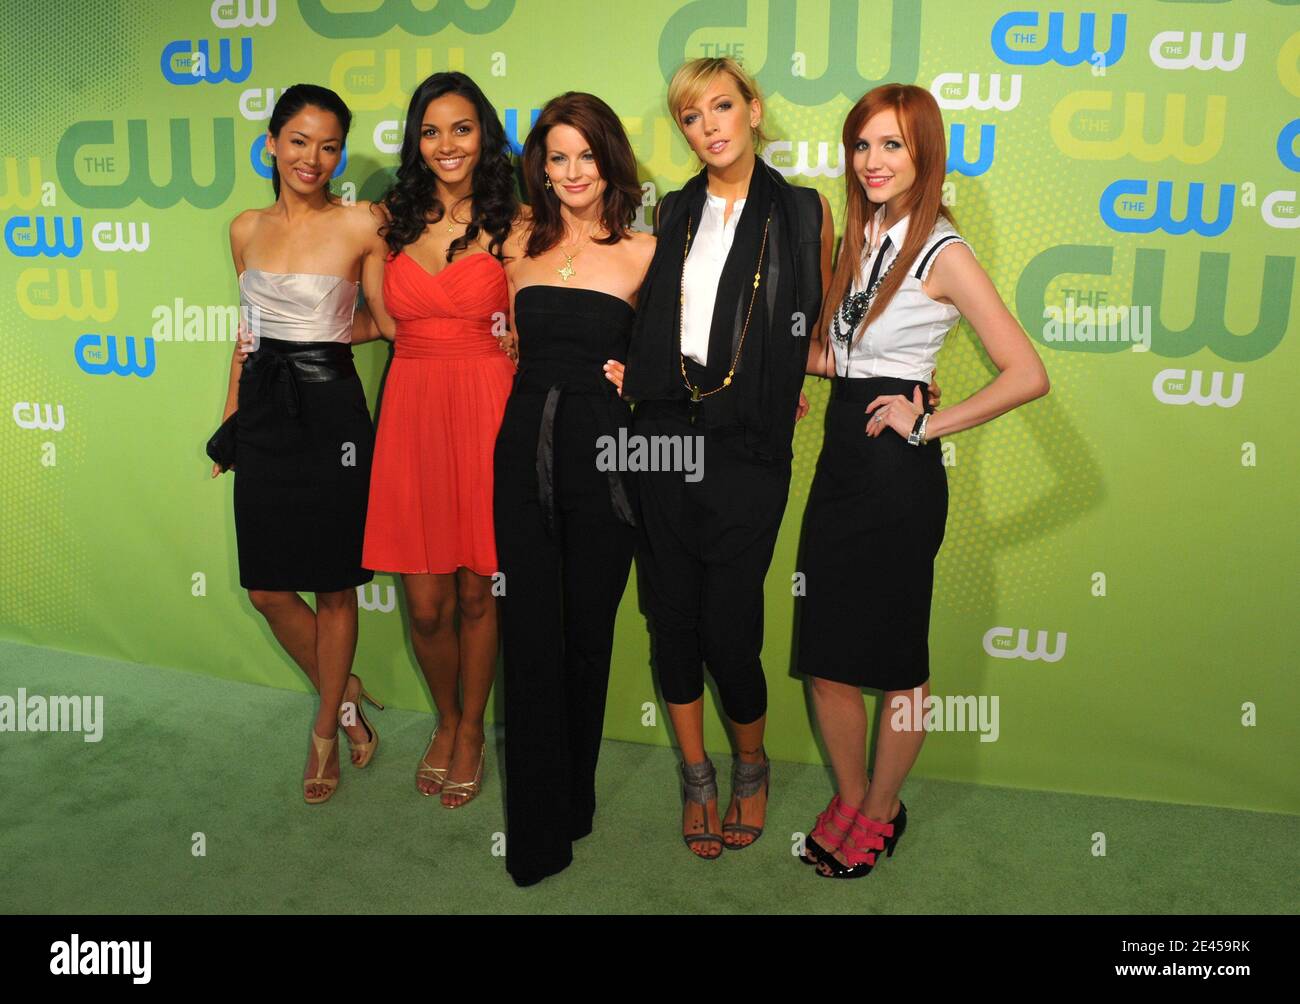 (L-R) Actors Stephanie Jacobsen, Jessica Lucas, Laura Leighton, Katie Cassidy and Ashlee Simpson at The 2009 CW Network UpFront at Madison Square Garden in New York City, NY, USA on May 21, 2009. Photo by Gregorio Binuya/ABACAPRESS.COM Stock Photo